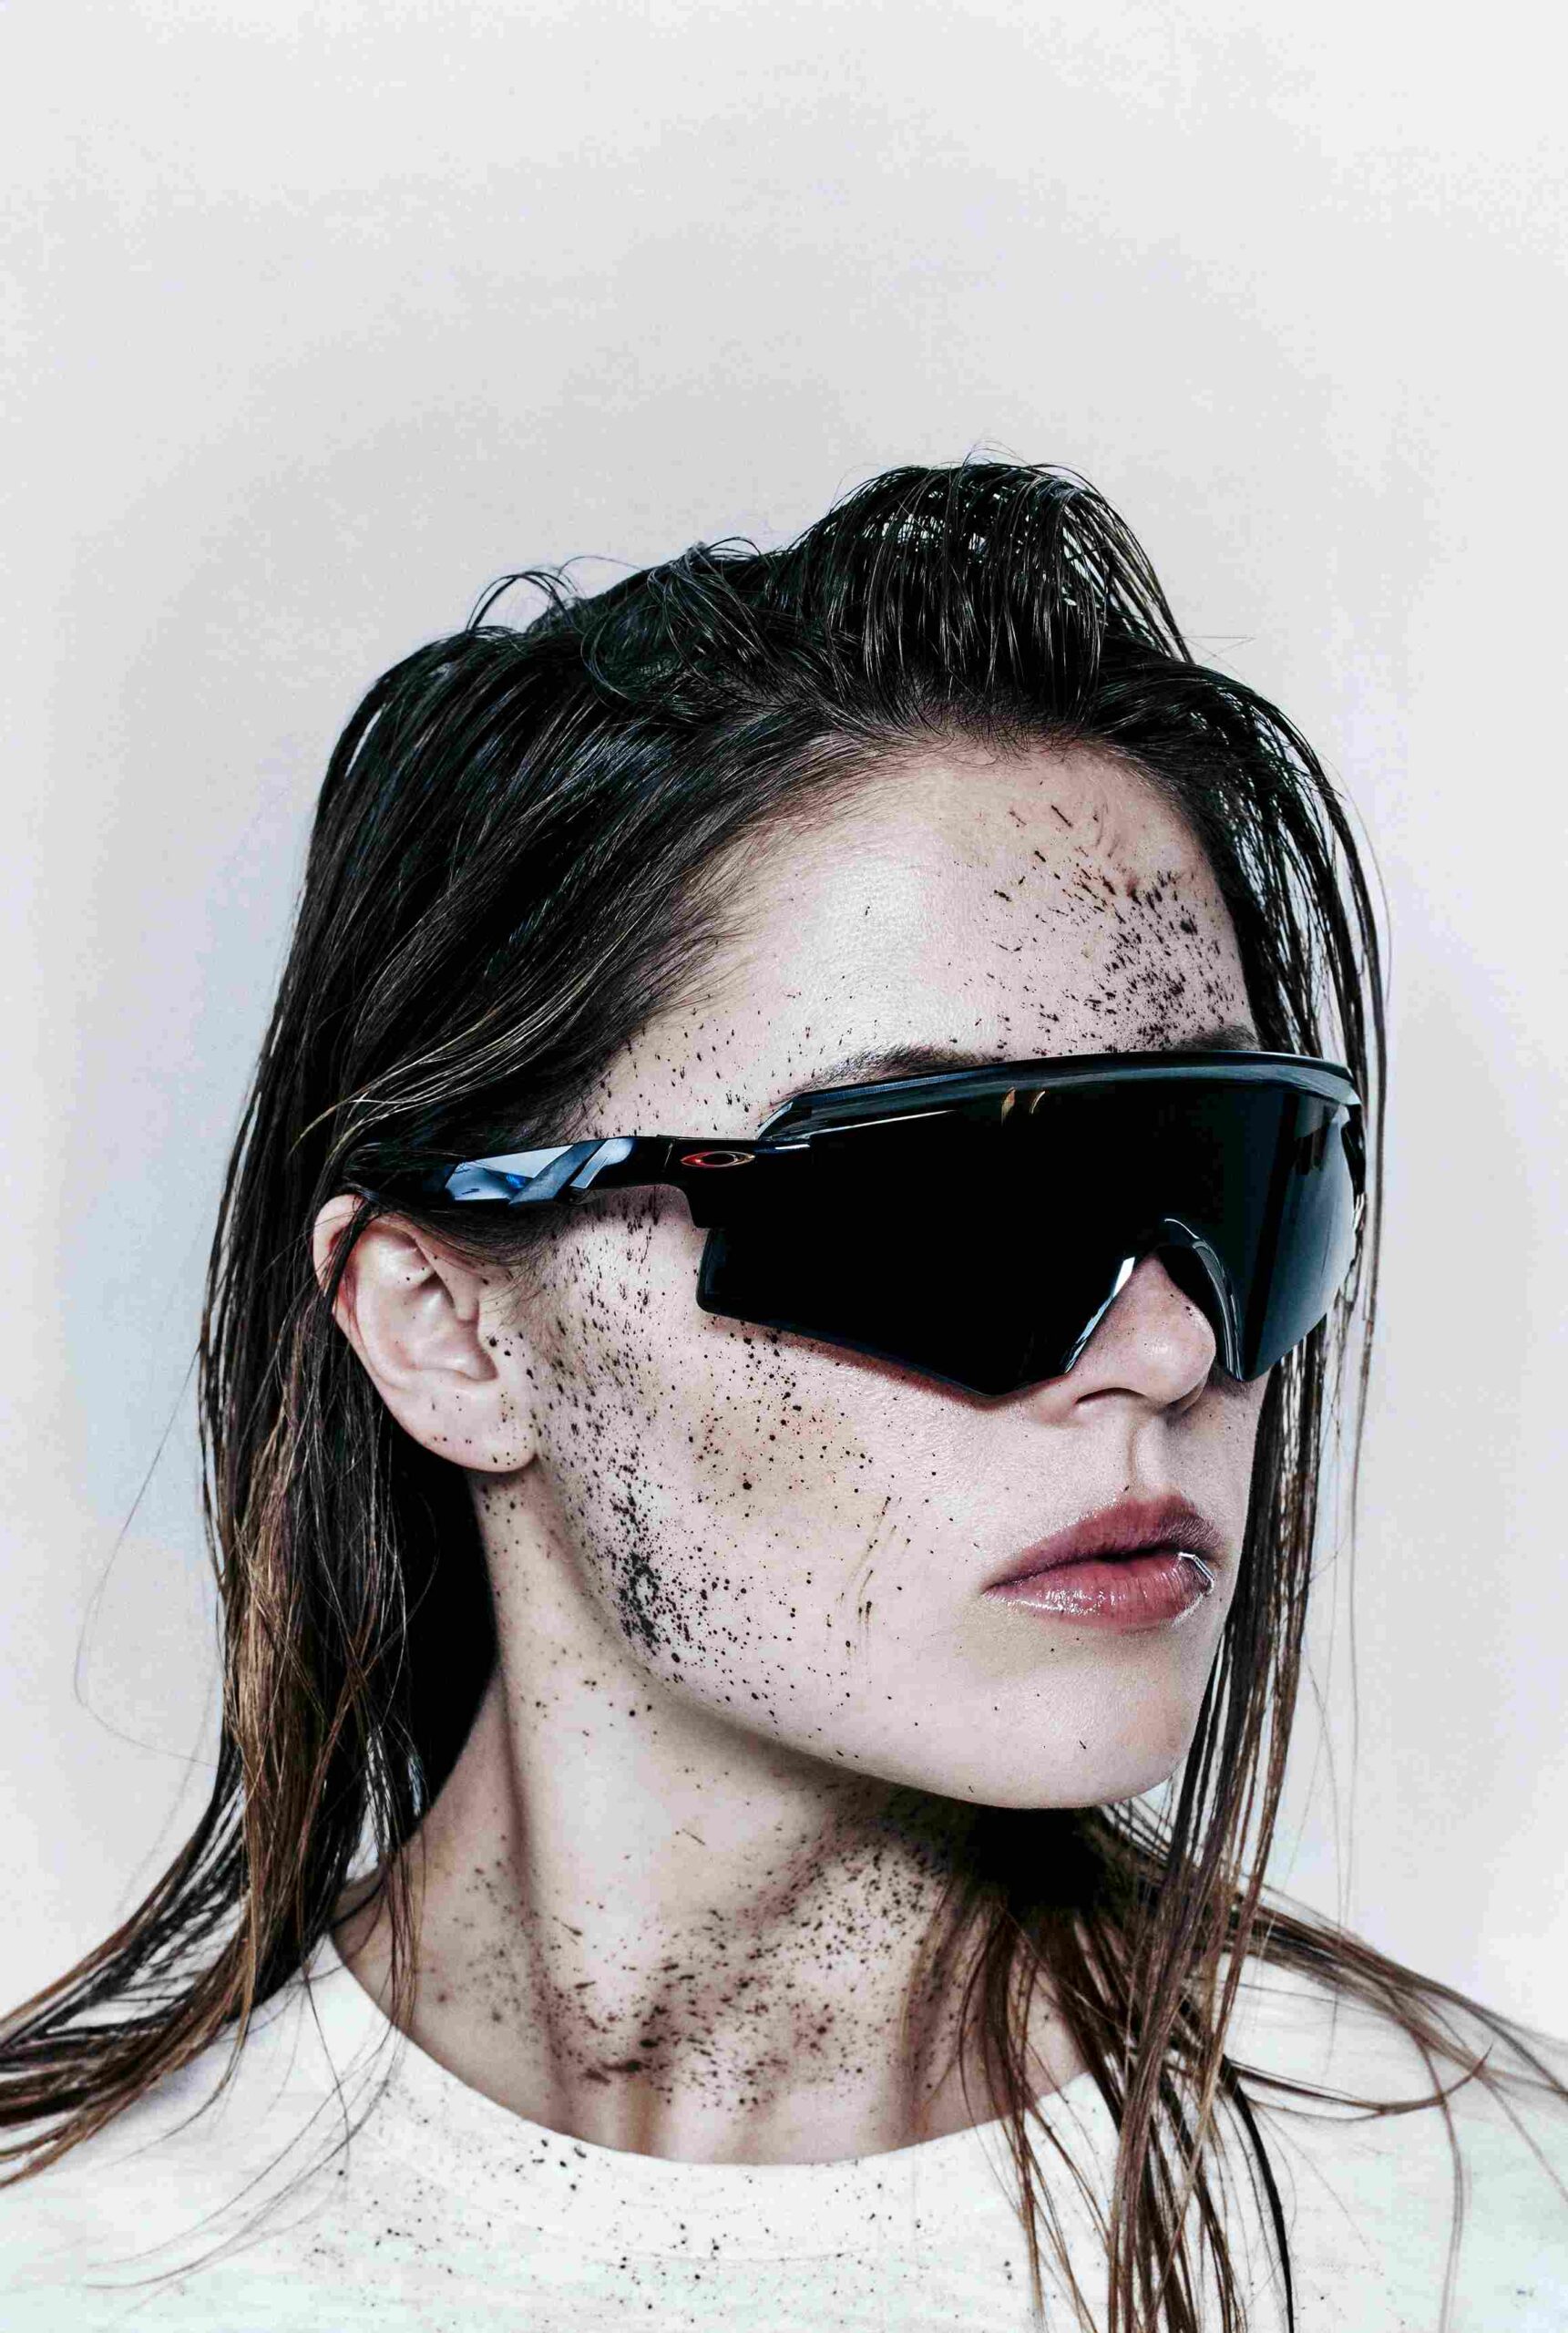 Charlotte de Witte unleashes ‘How You Move’, the second extract from upcoming EP